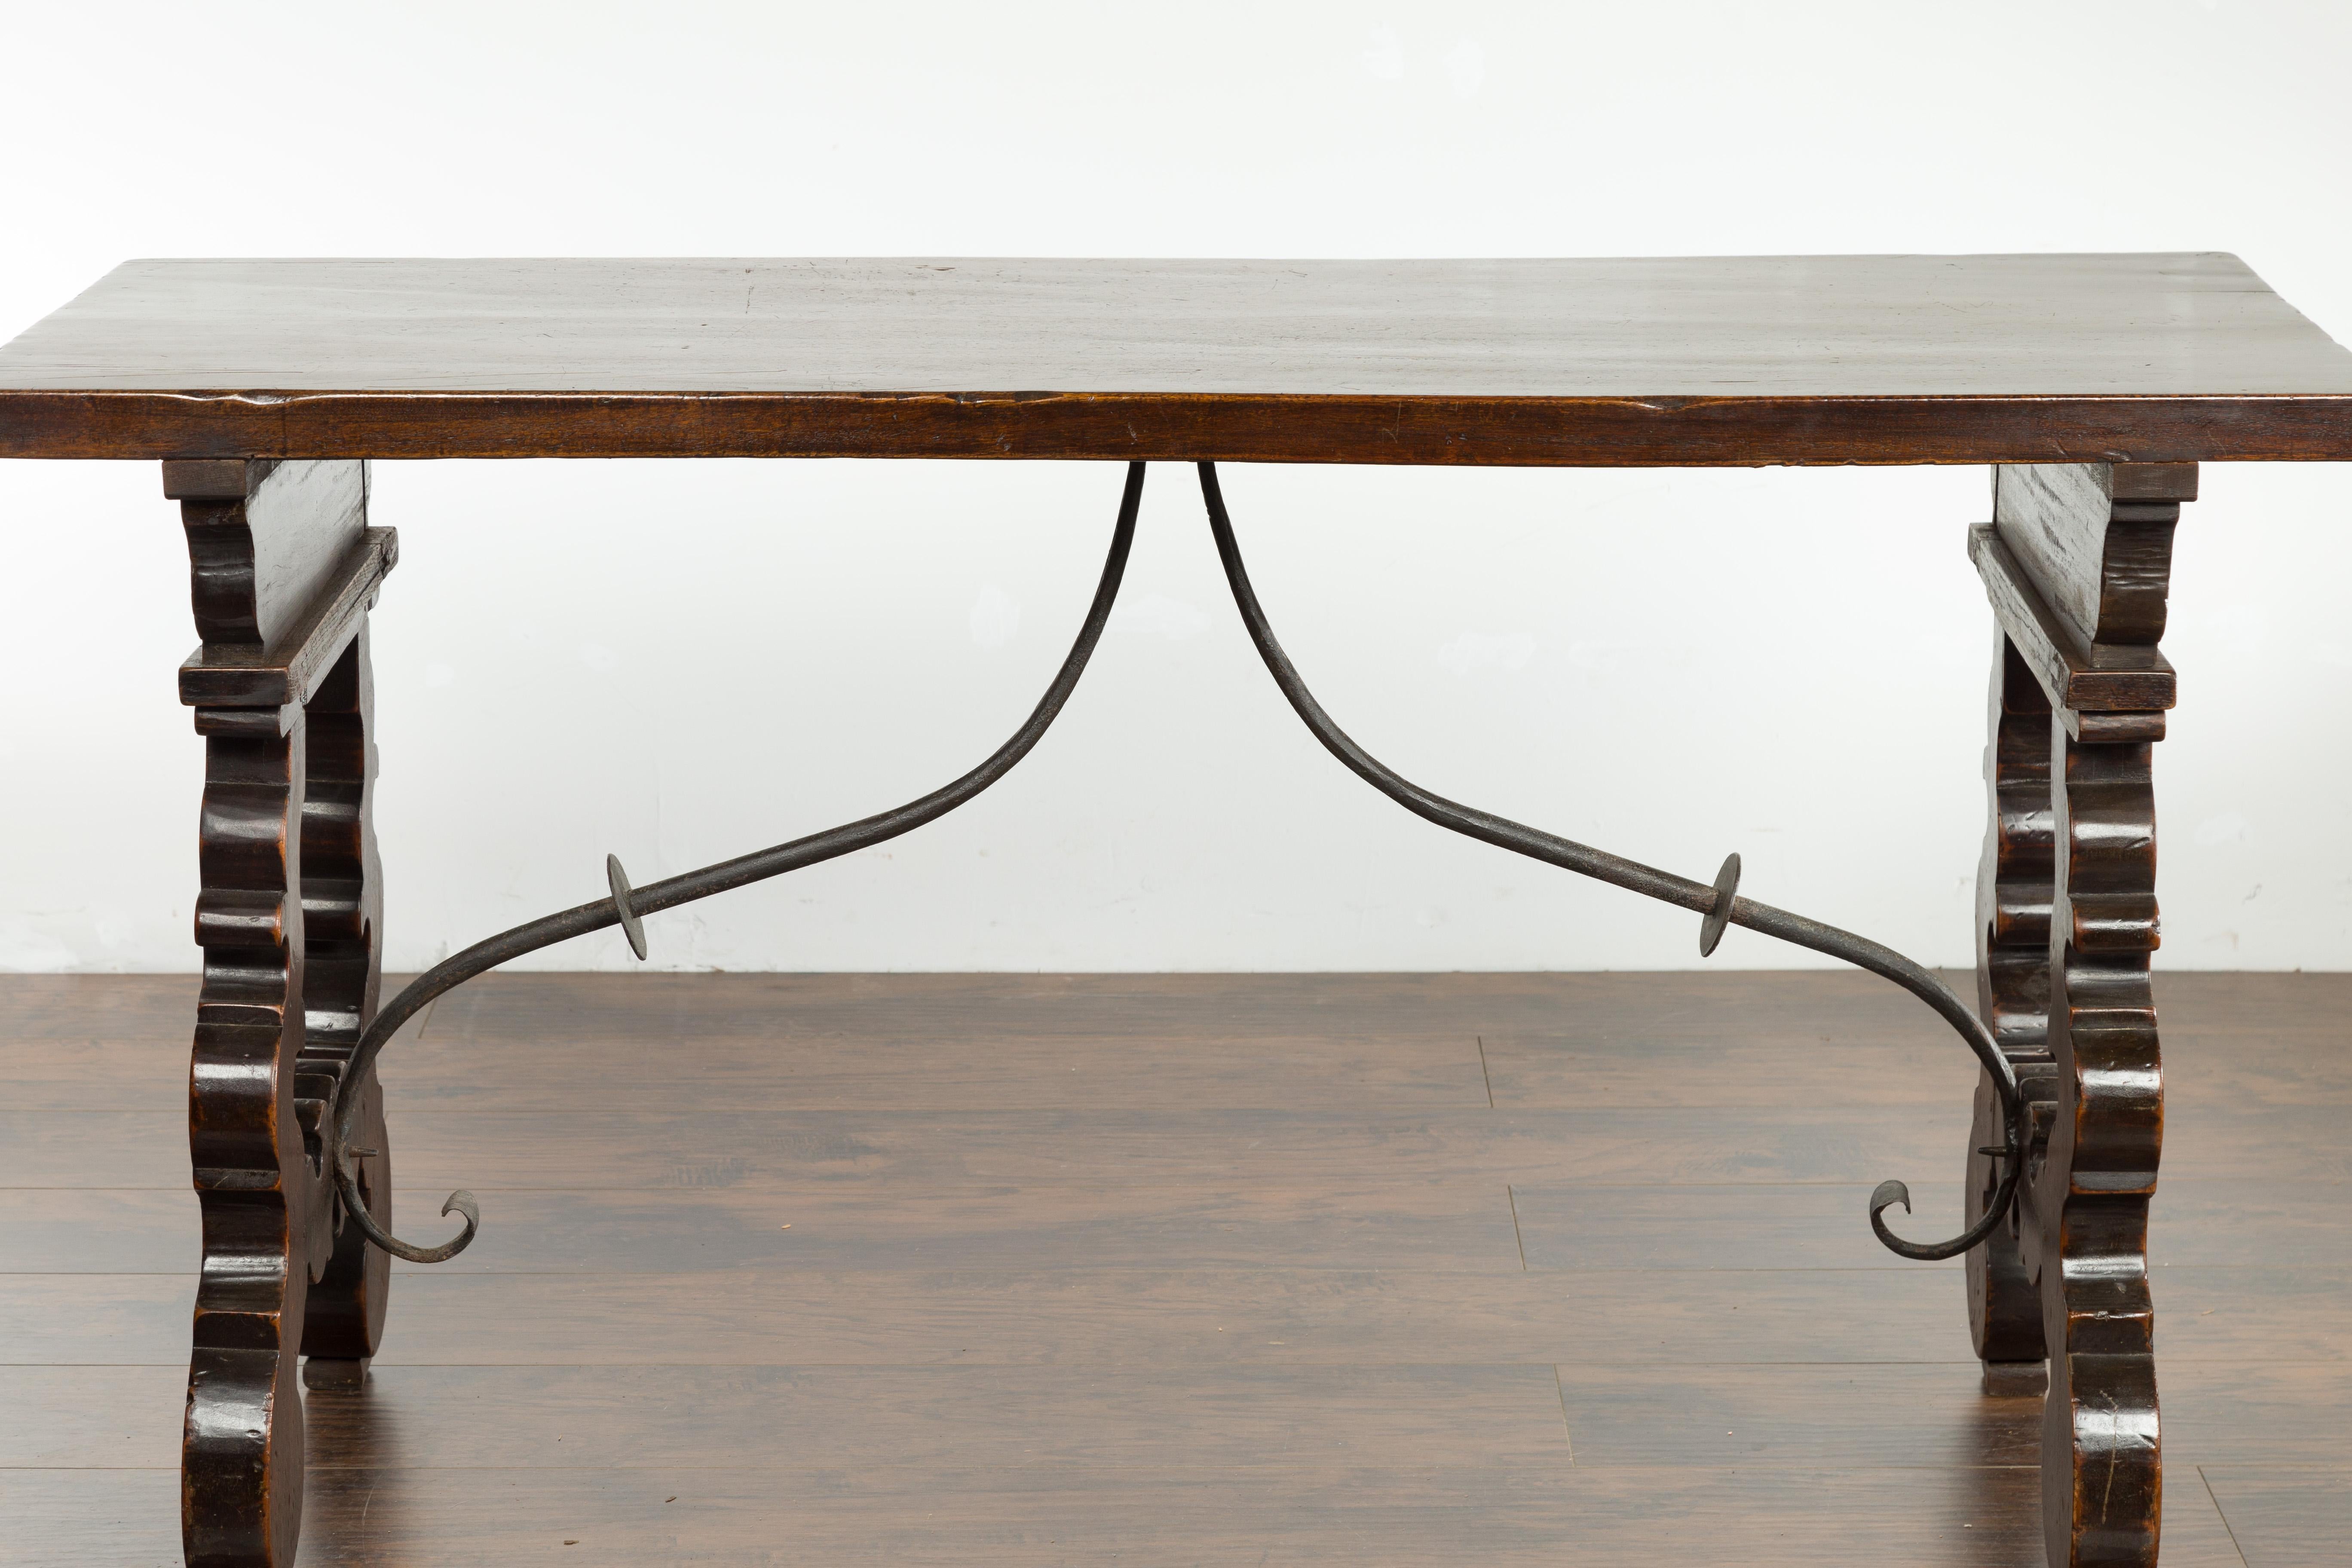 Italian 1820s Walnut Fratino Table with Iron Stretcher and Extension Leaves 3